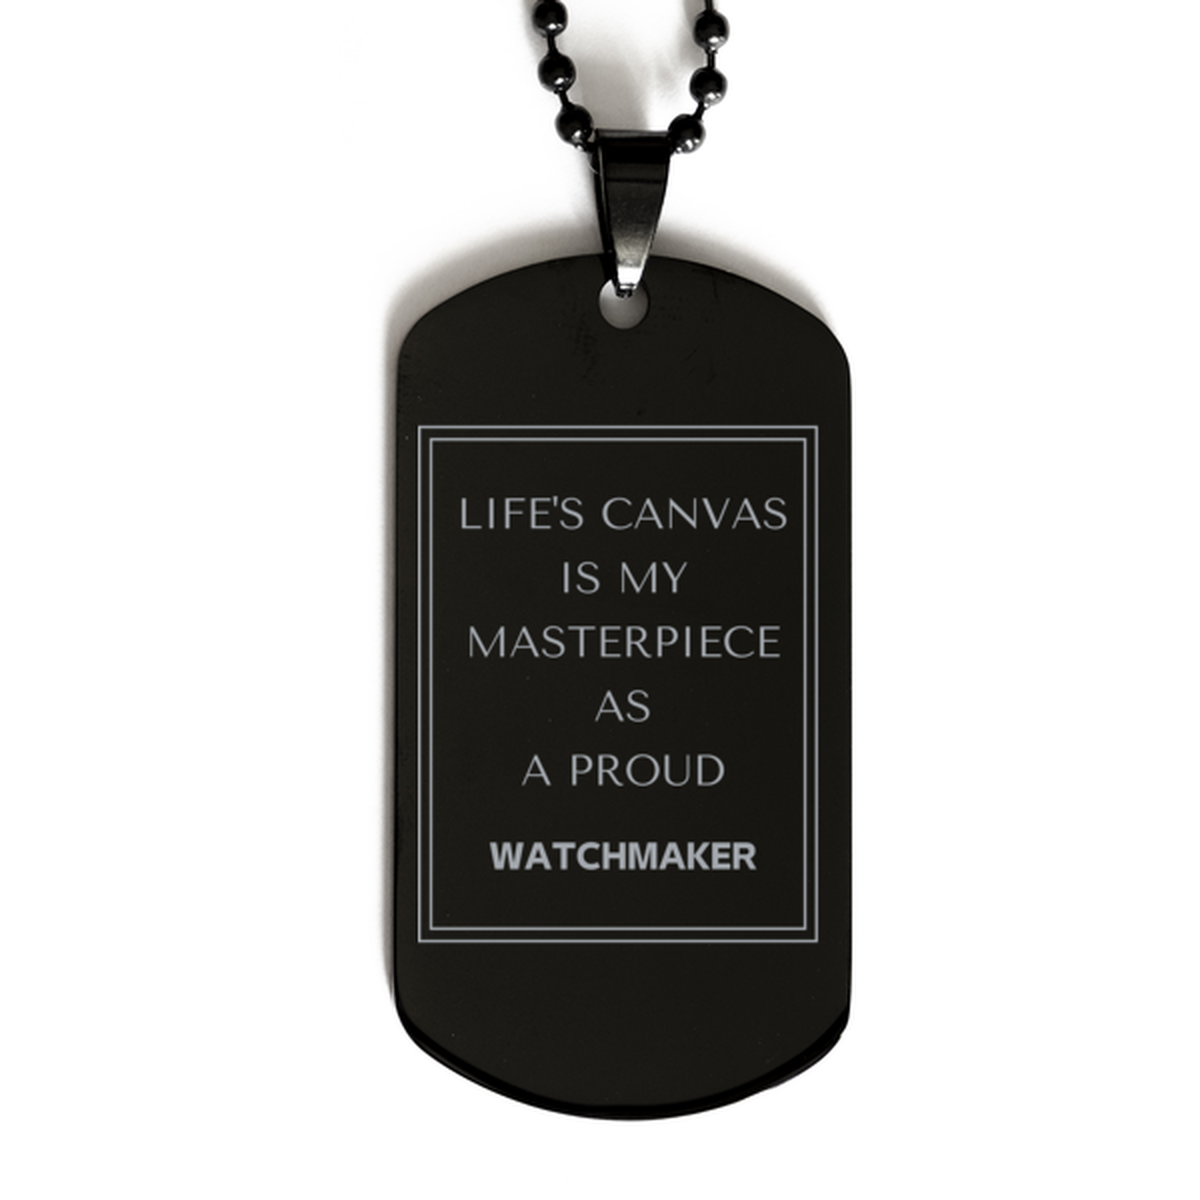 Proud Watchmaker Gifts, Life's canvas is my masterpiece, Epic Birthday Christmas Unique Black Dog Tag For Watchmaker, Coworkers, Men, Women, Friends